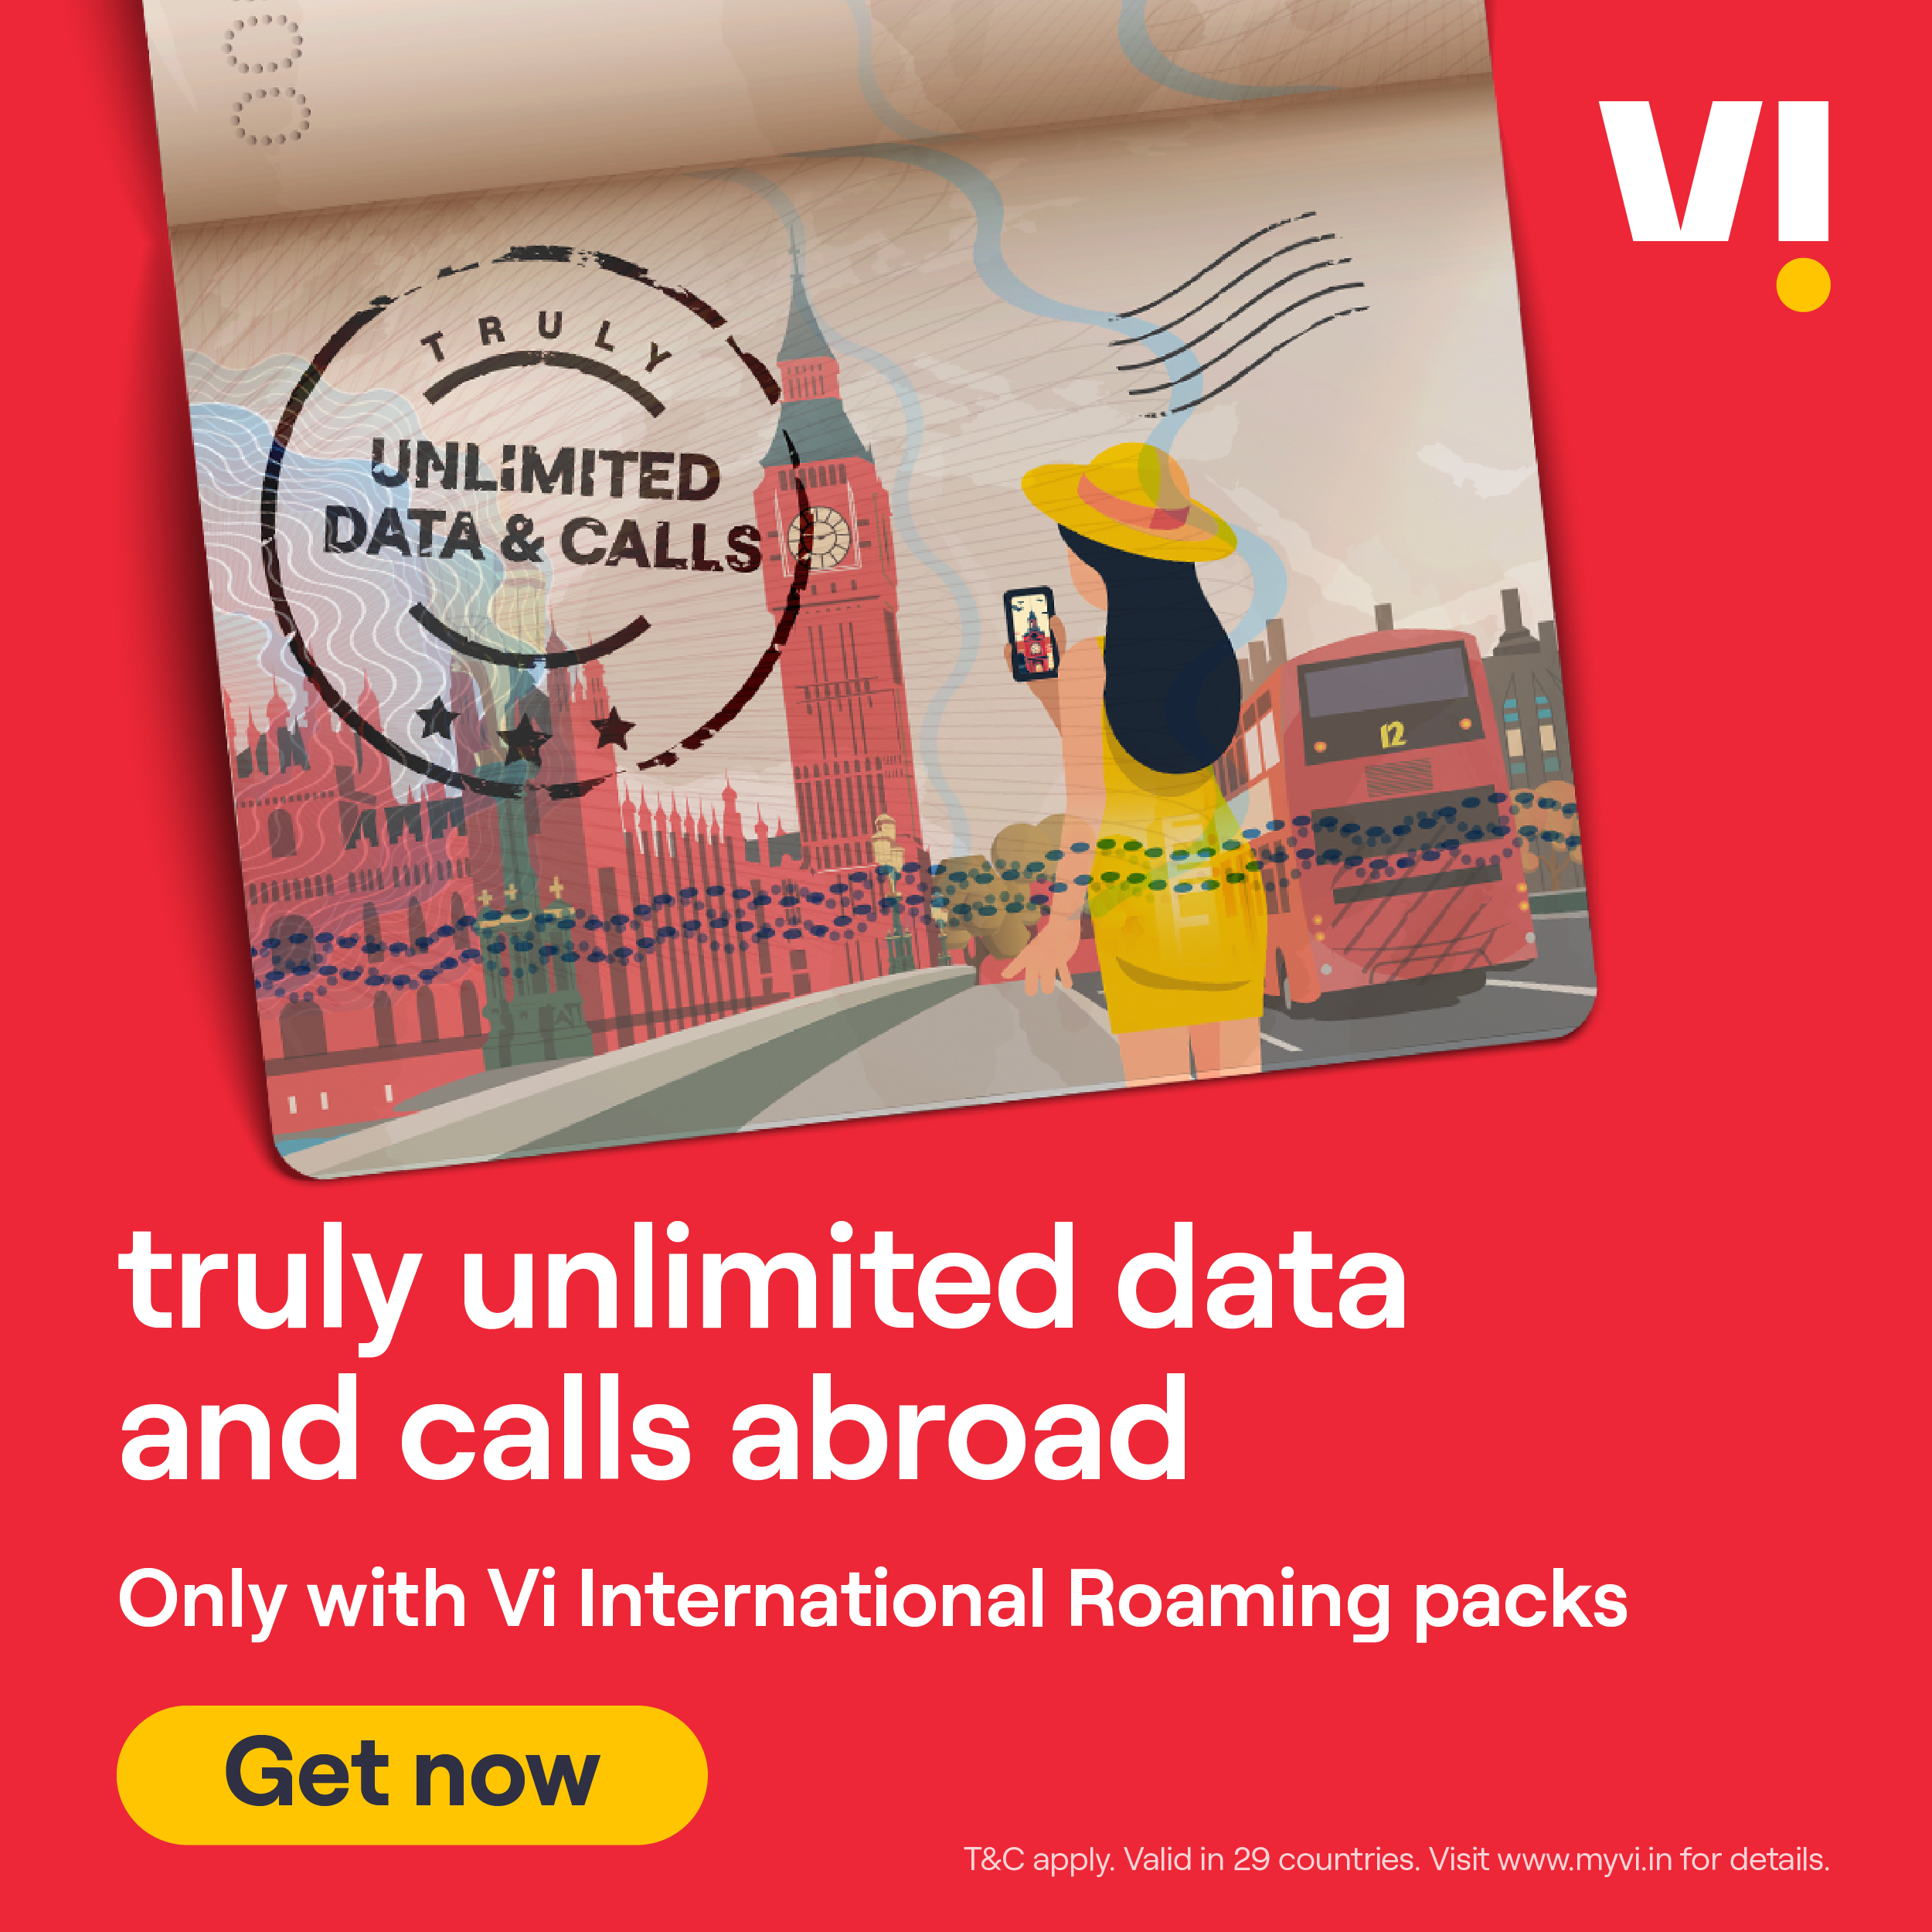 V Launches International Roaming Campaign